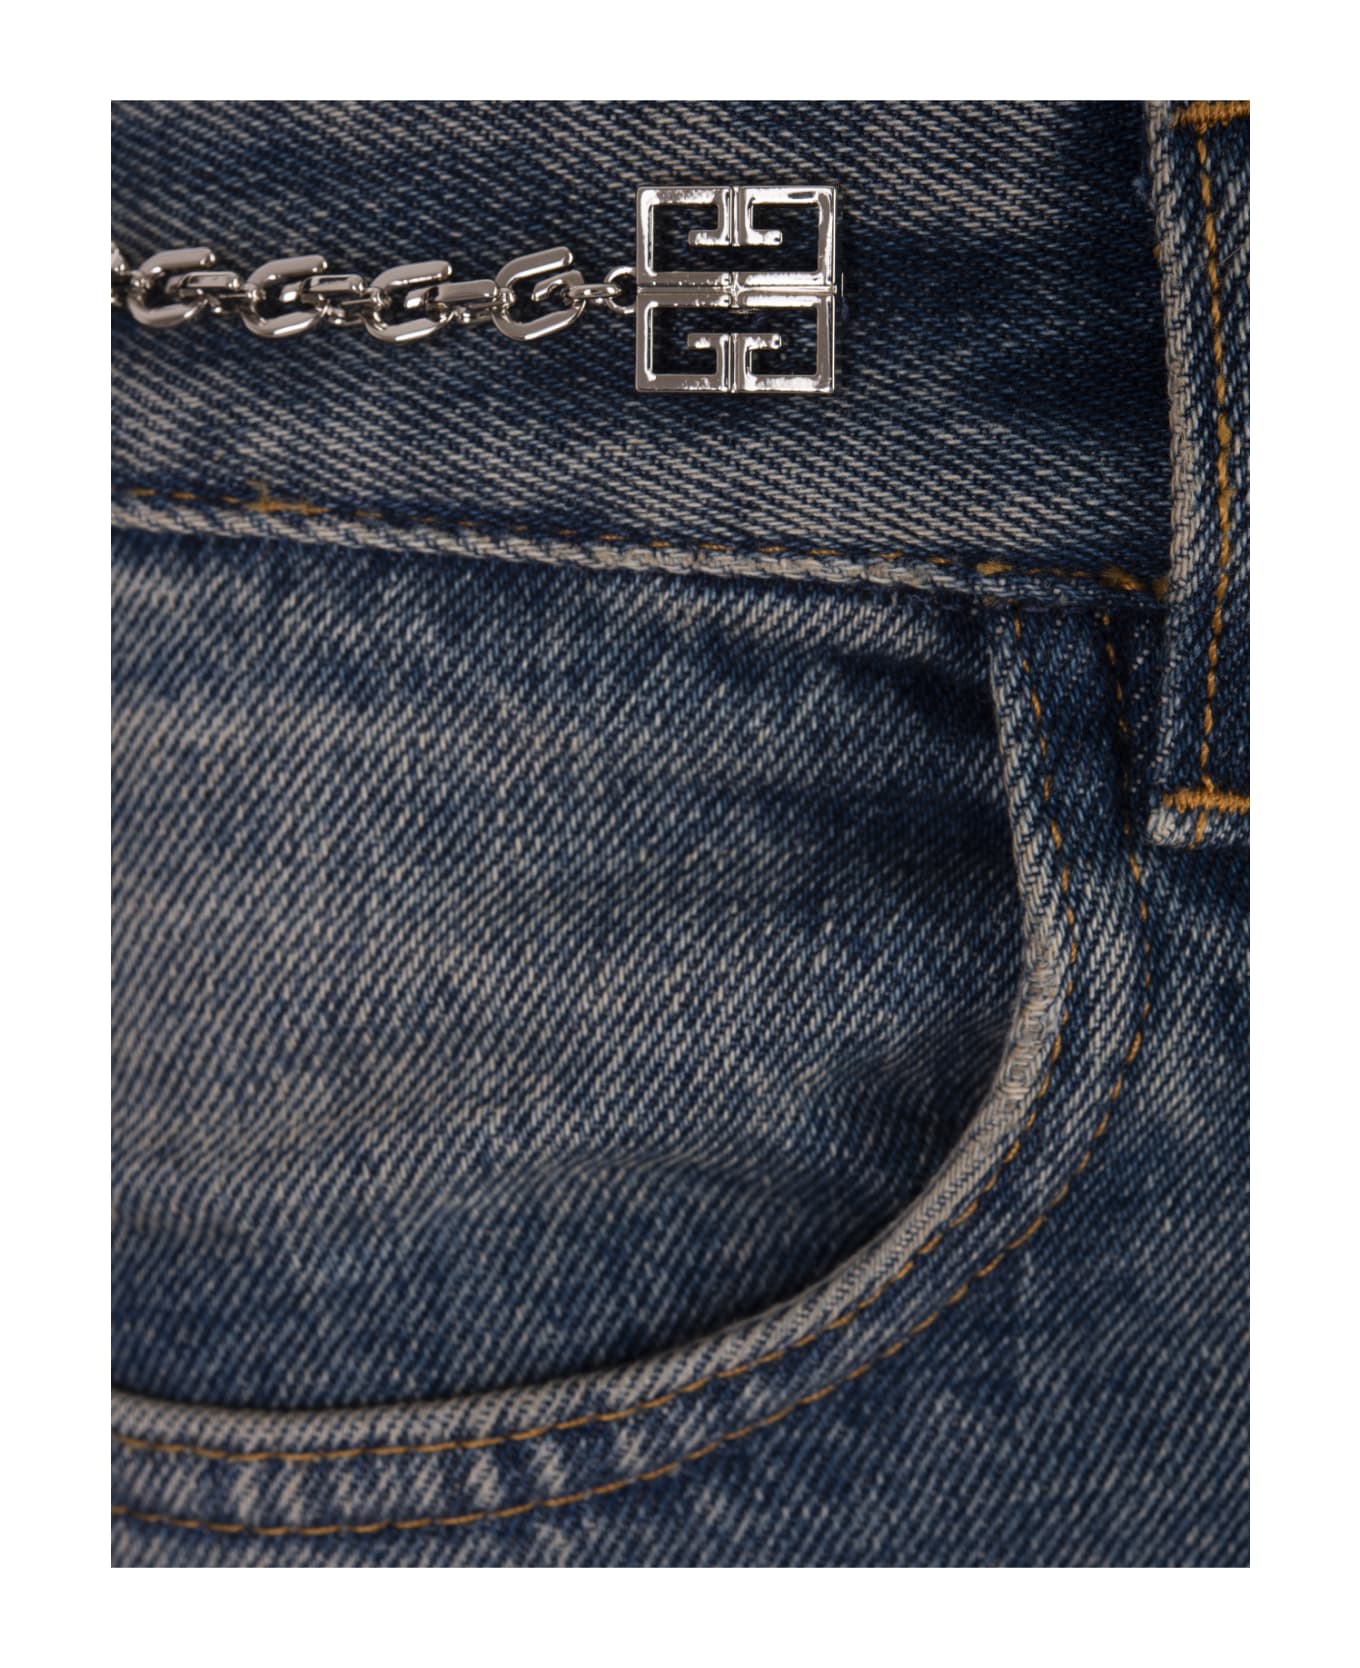 Givenchy Medium Blue Denim Jeans With Boot Cut - Blue